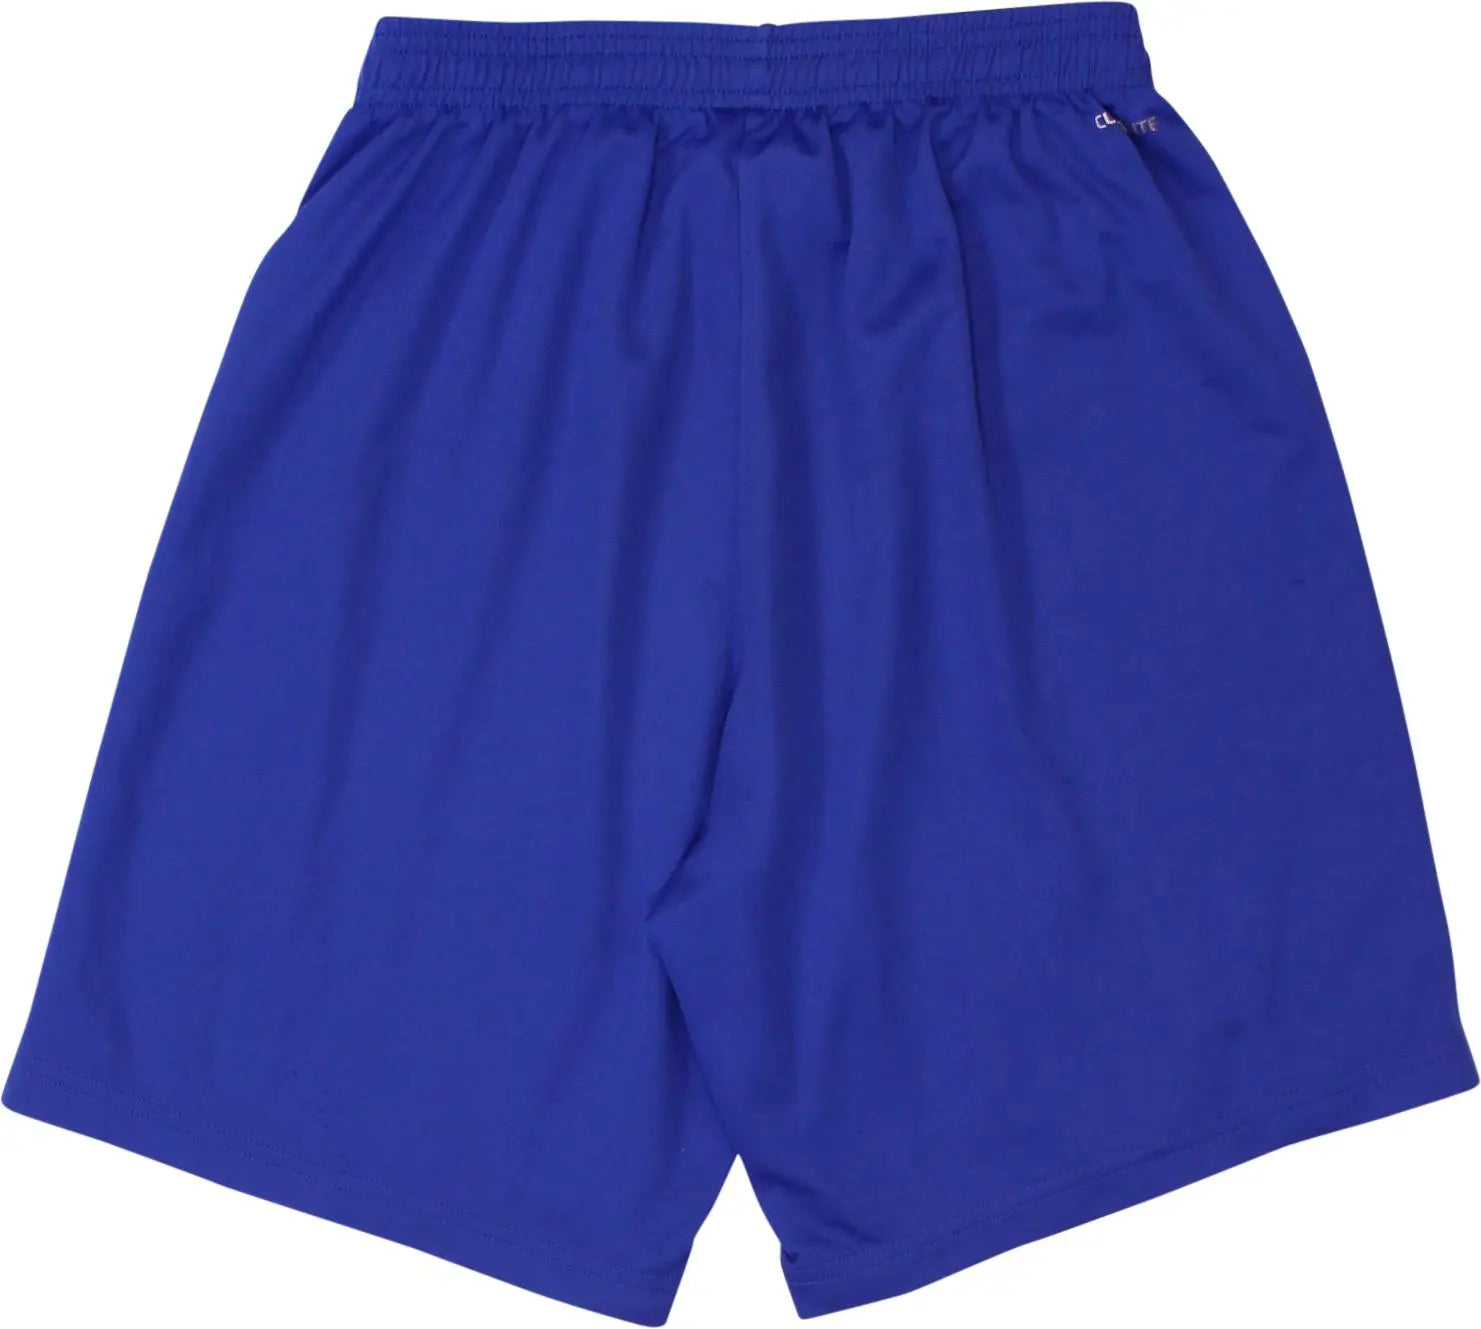 Adidas - Blue Training Shorts by Adidas- ThriftTale.com - Vintage and second handclothing